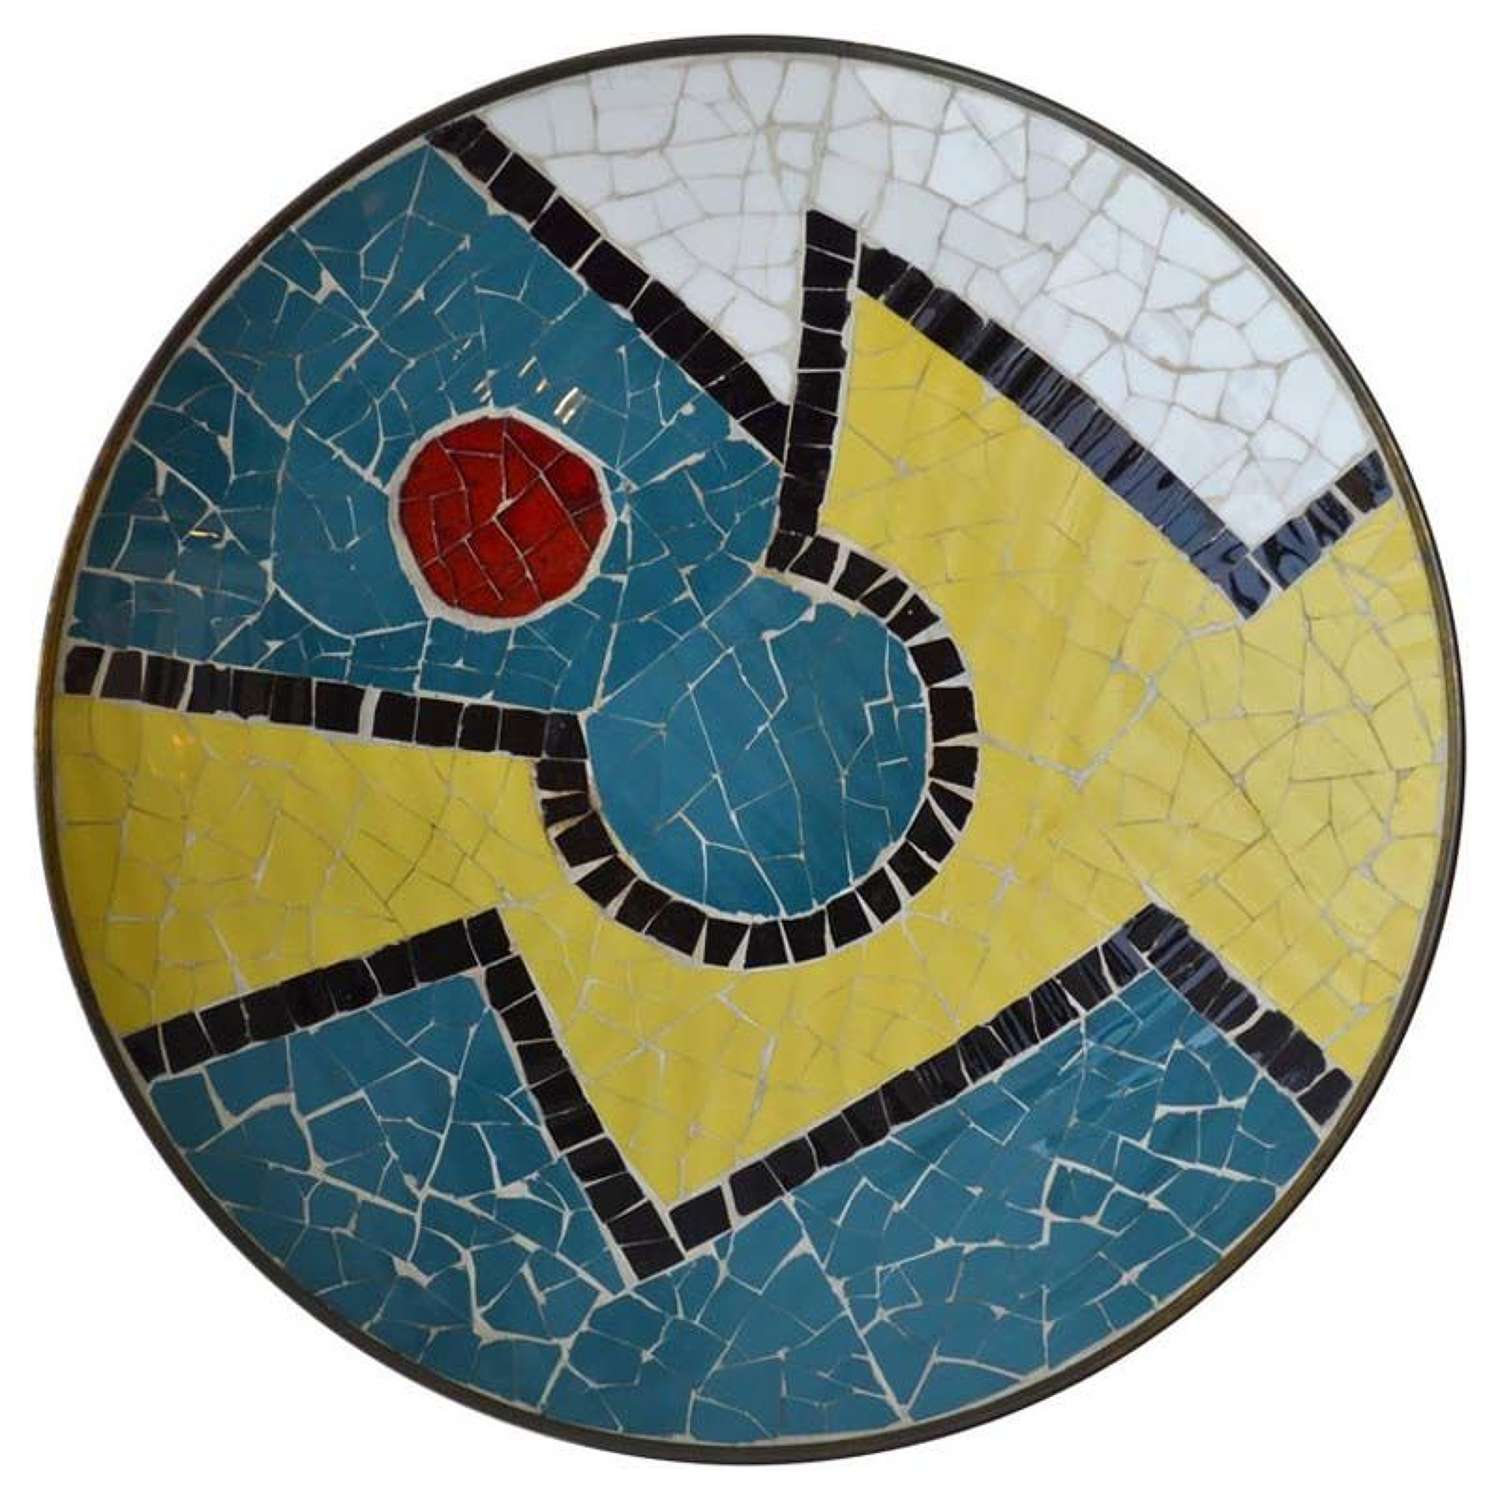 Charger & Wall Plate in Brass with Colorful Mosaic Motif